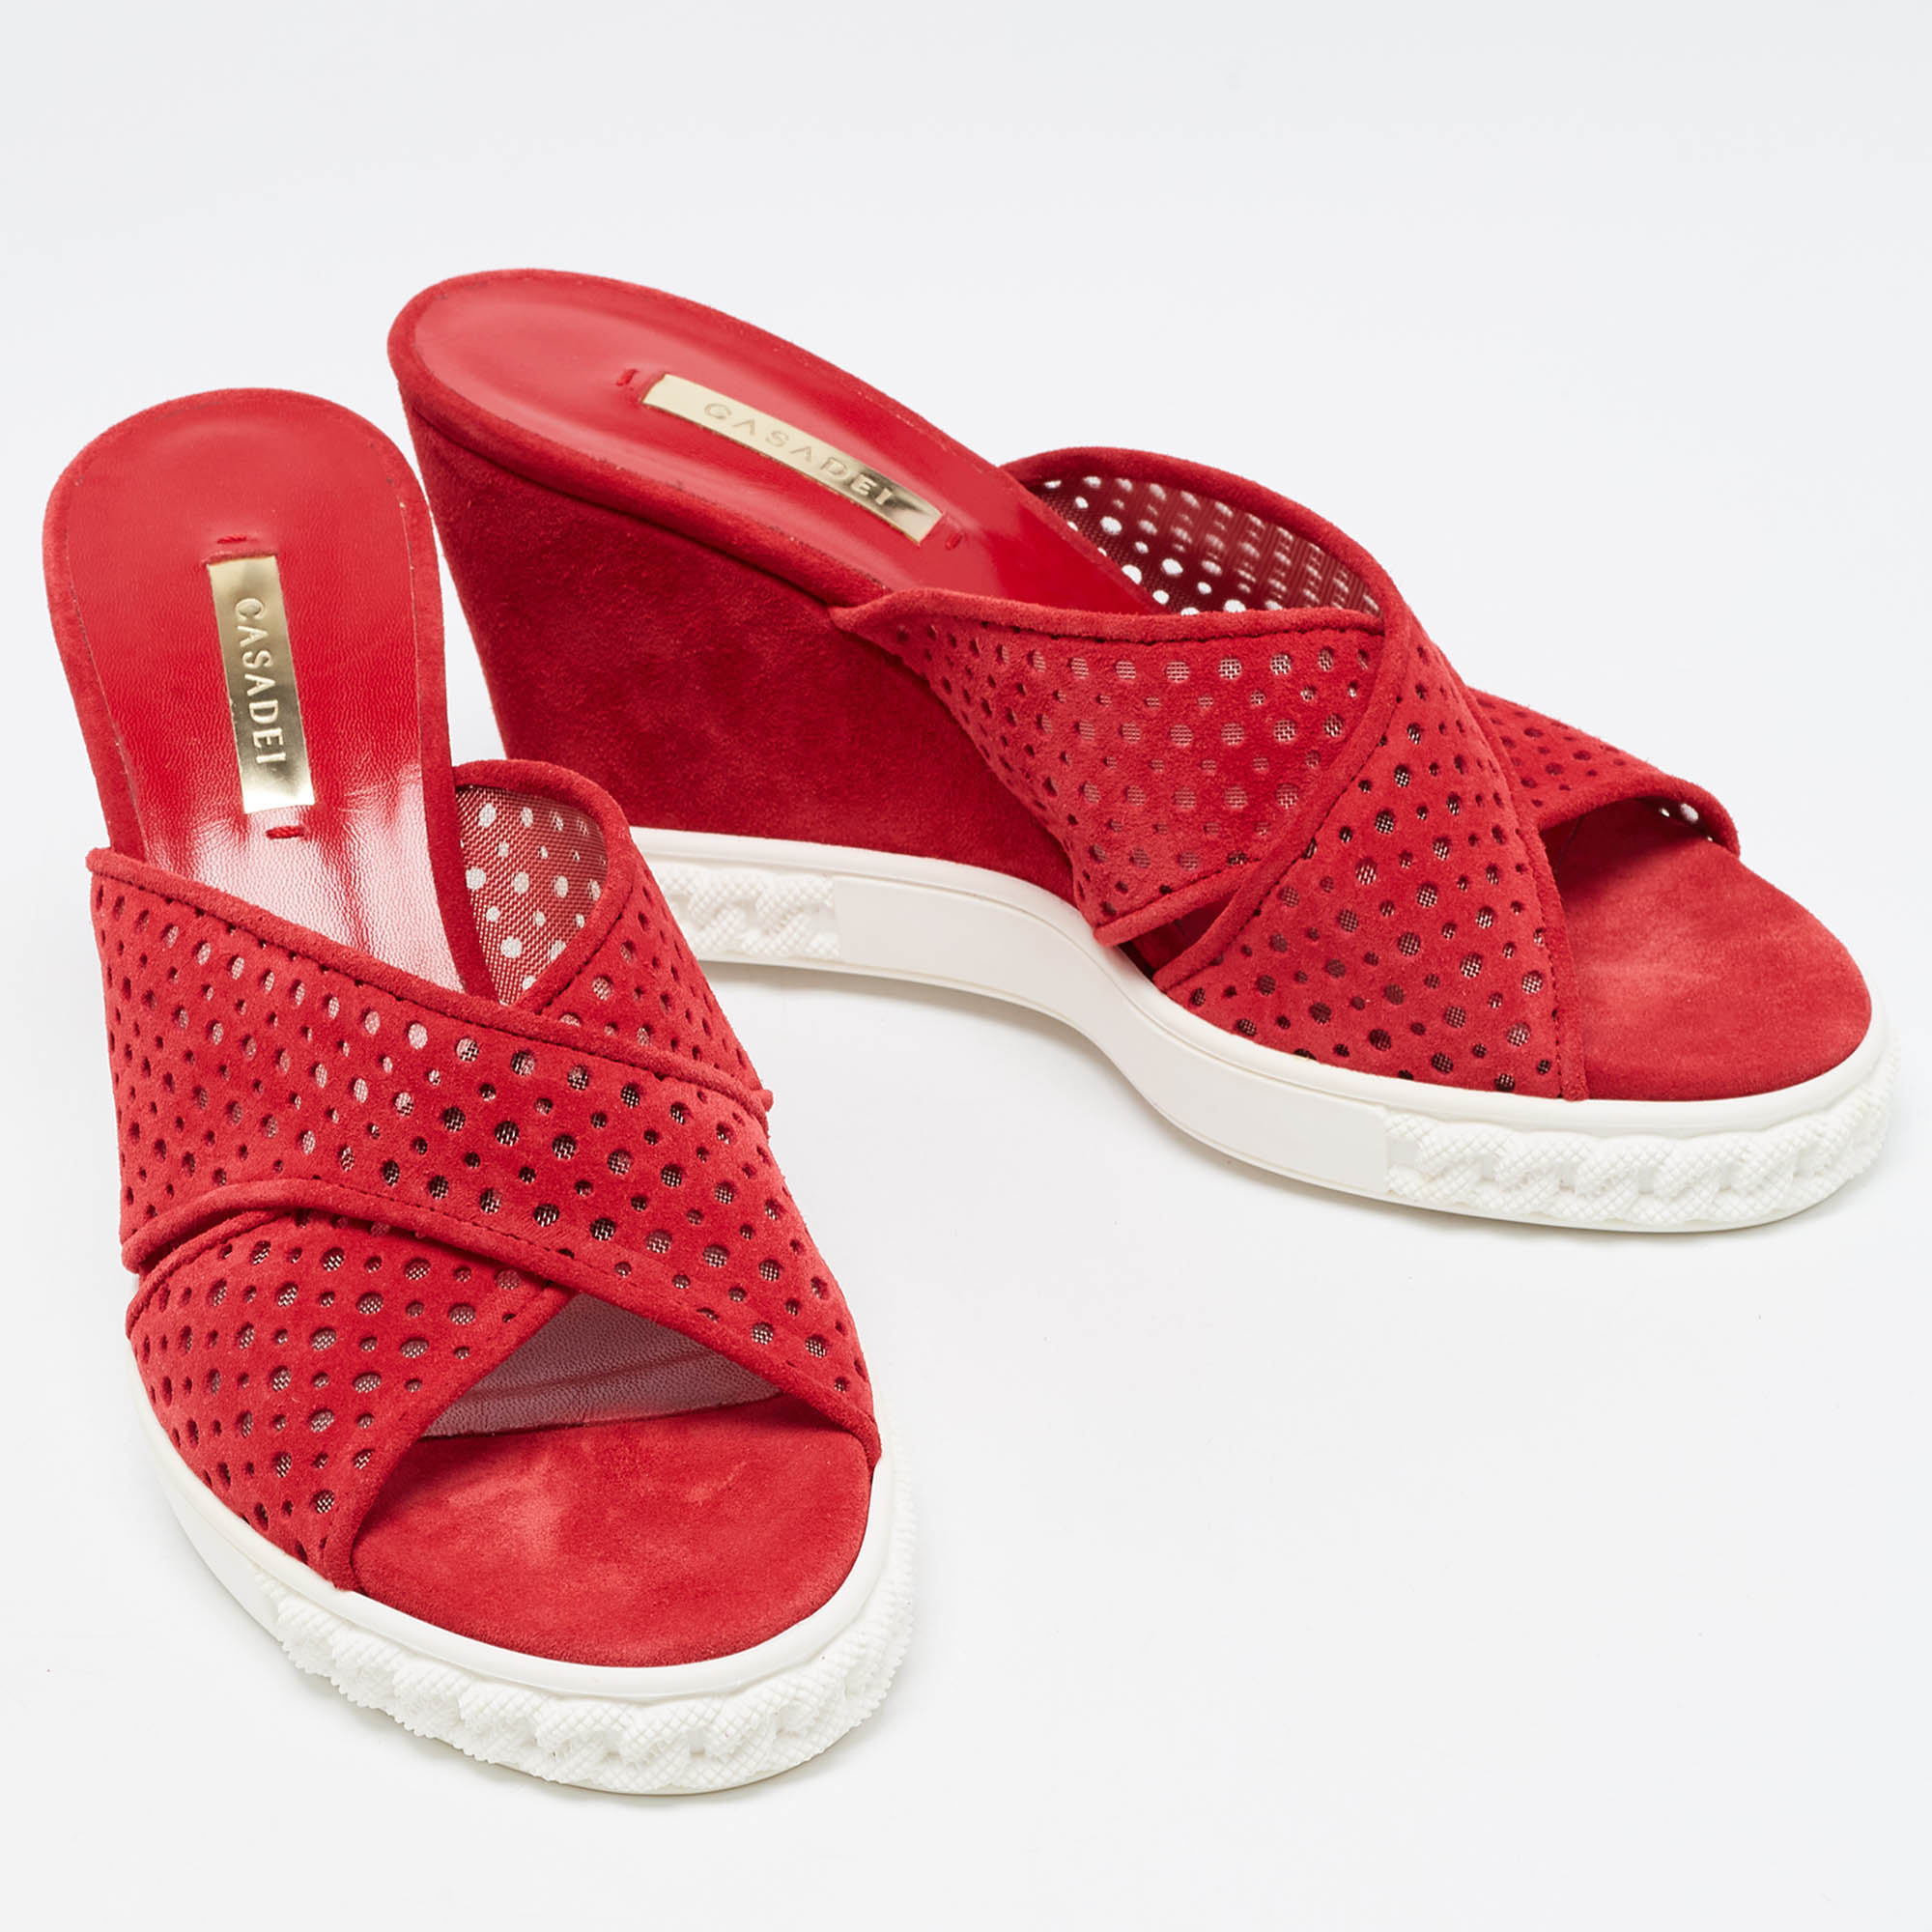 Casadei Red Suede Perforated Wedge Sandals Size 39